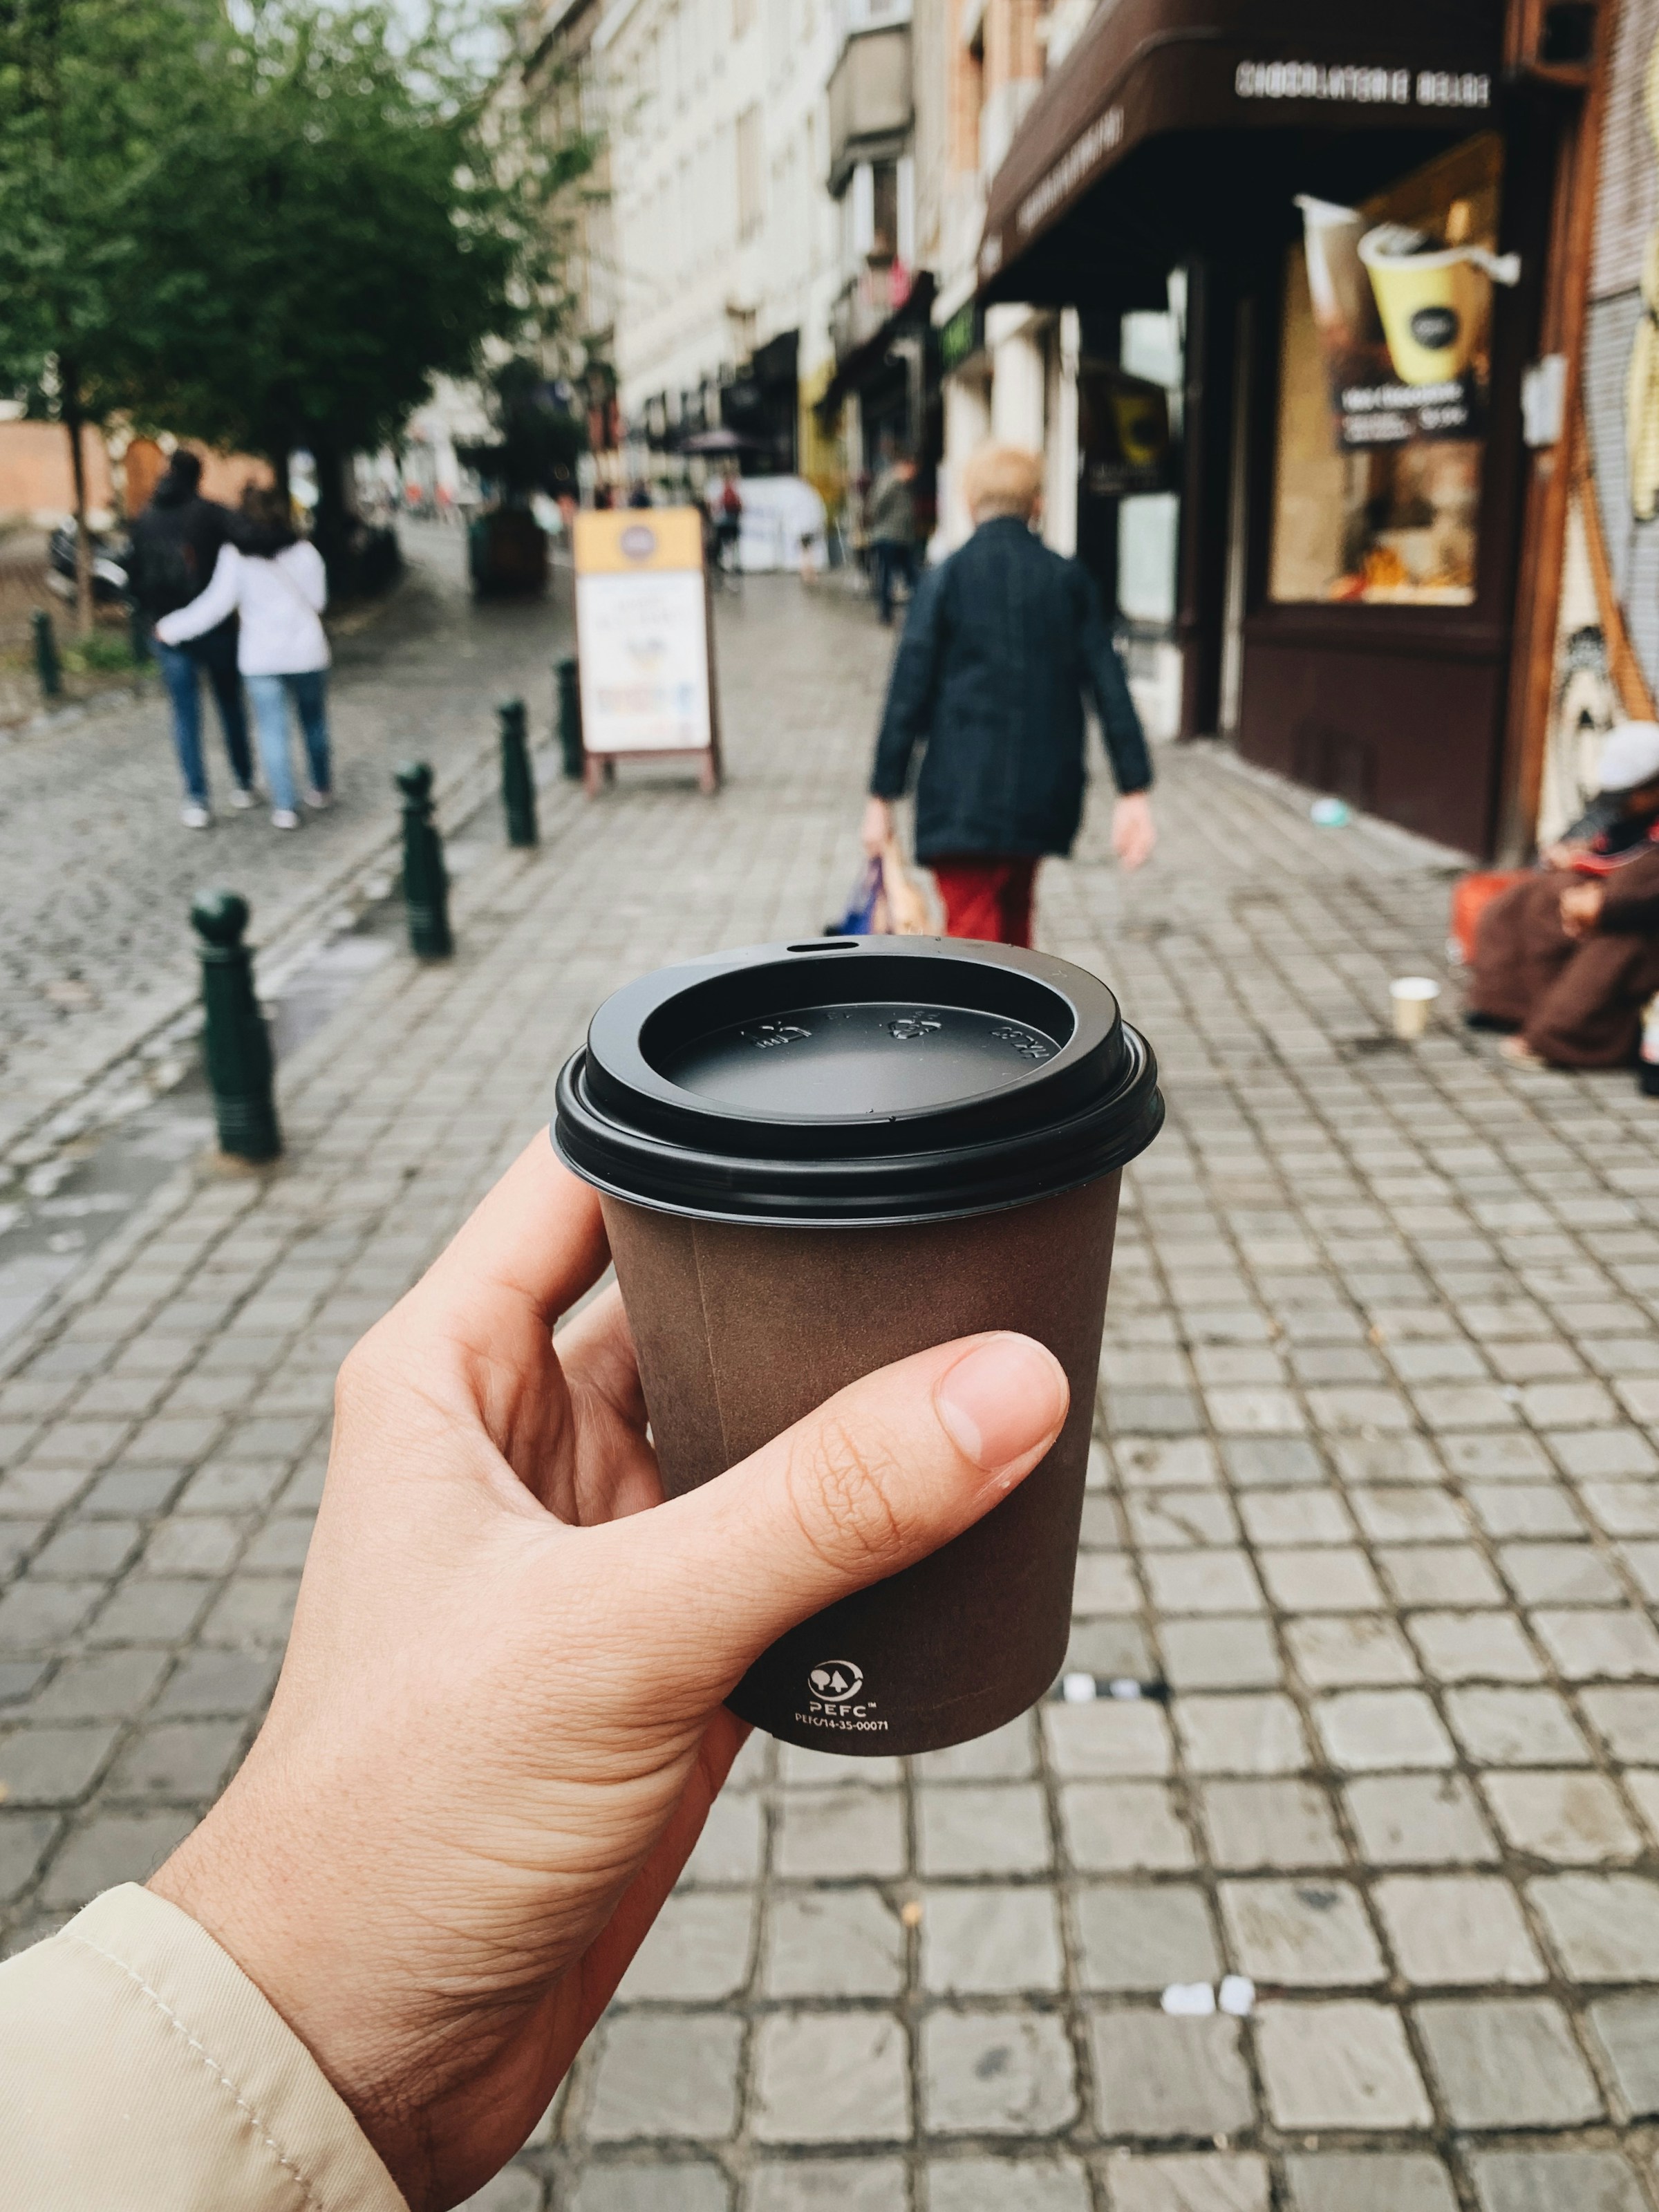 A person holding a takeaway coffee cup | Source: Unsplash